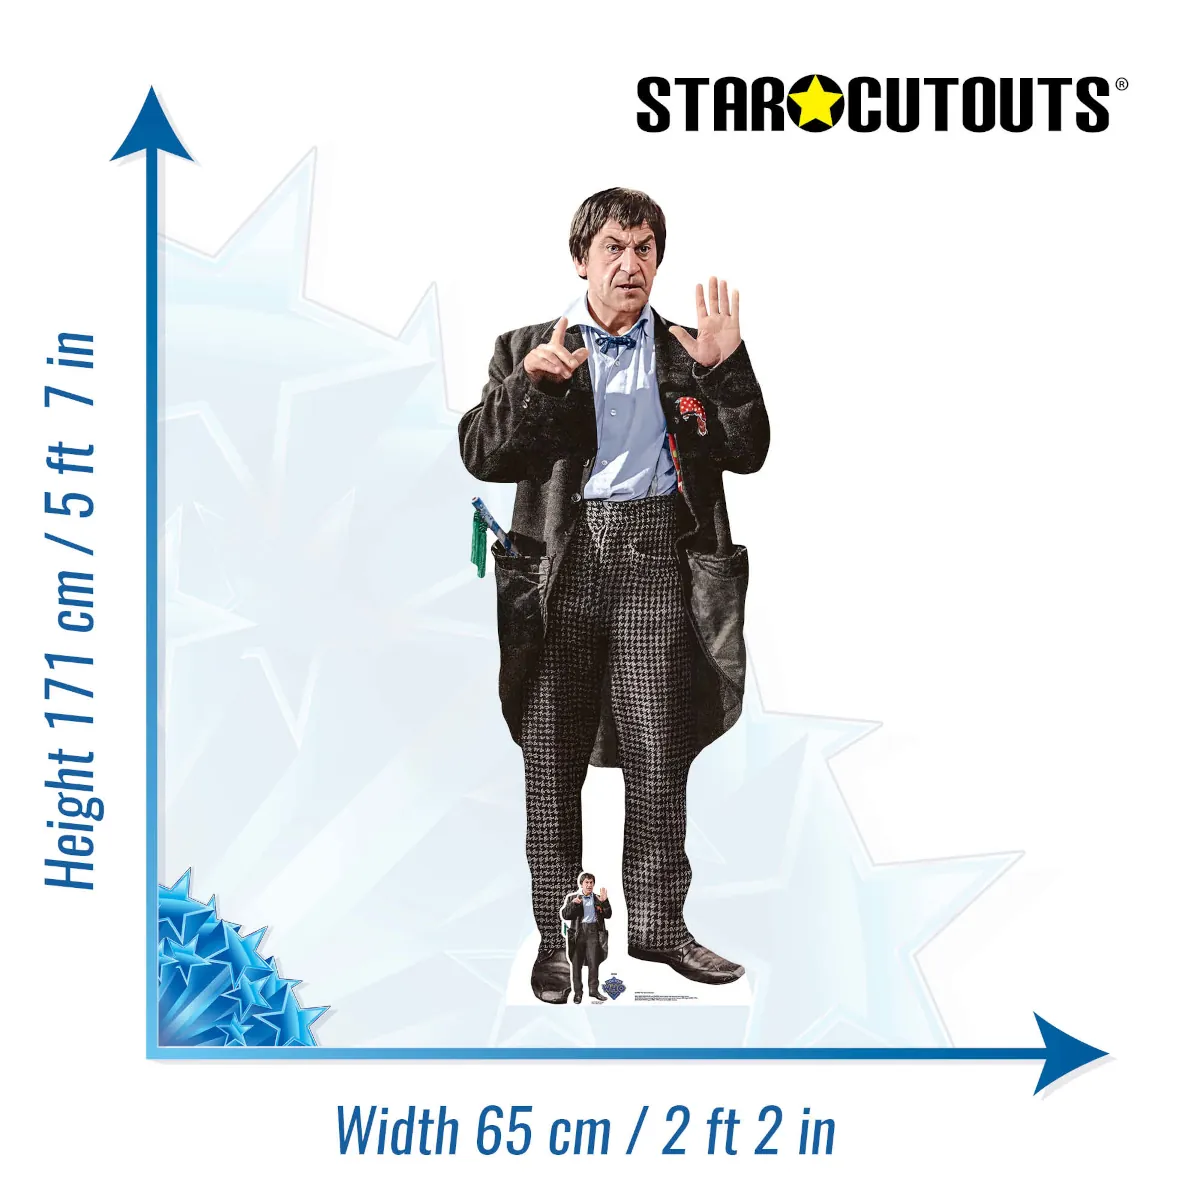 SC4402 The Second Doctor 'Patrick Troughton' (Doctor Who) Official Lifesize + Mini Cardboard Cutout Standee Size